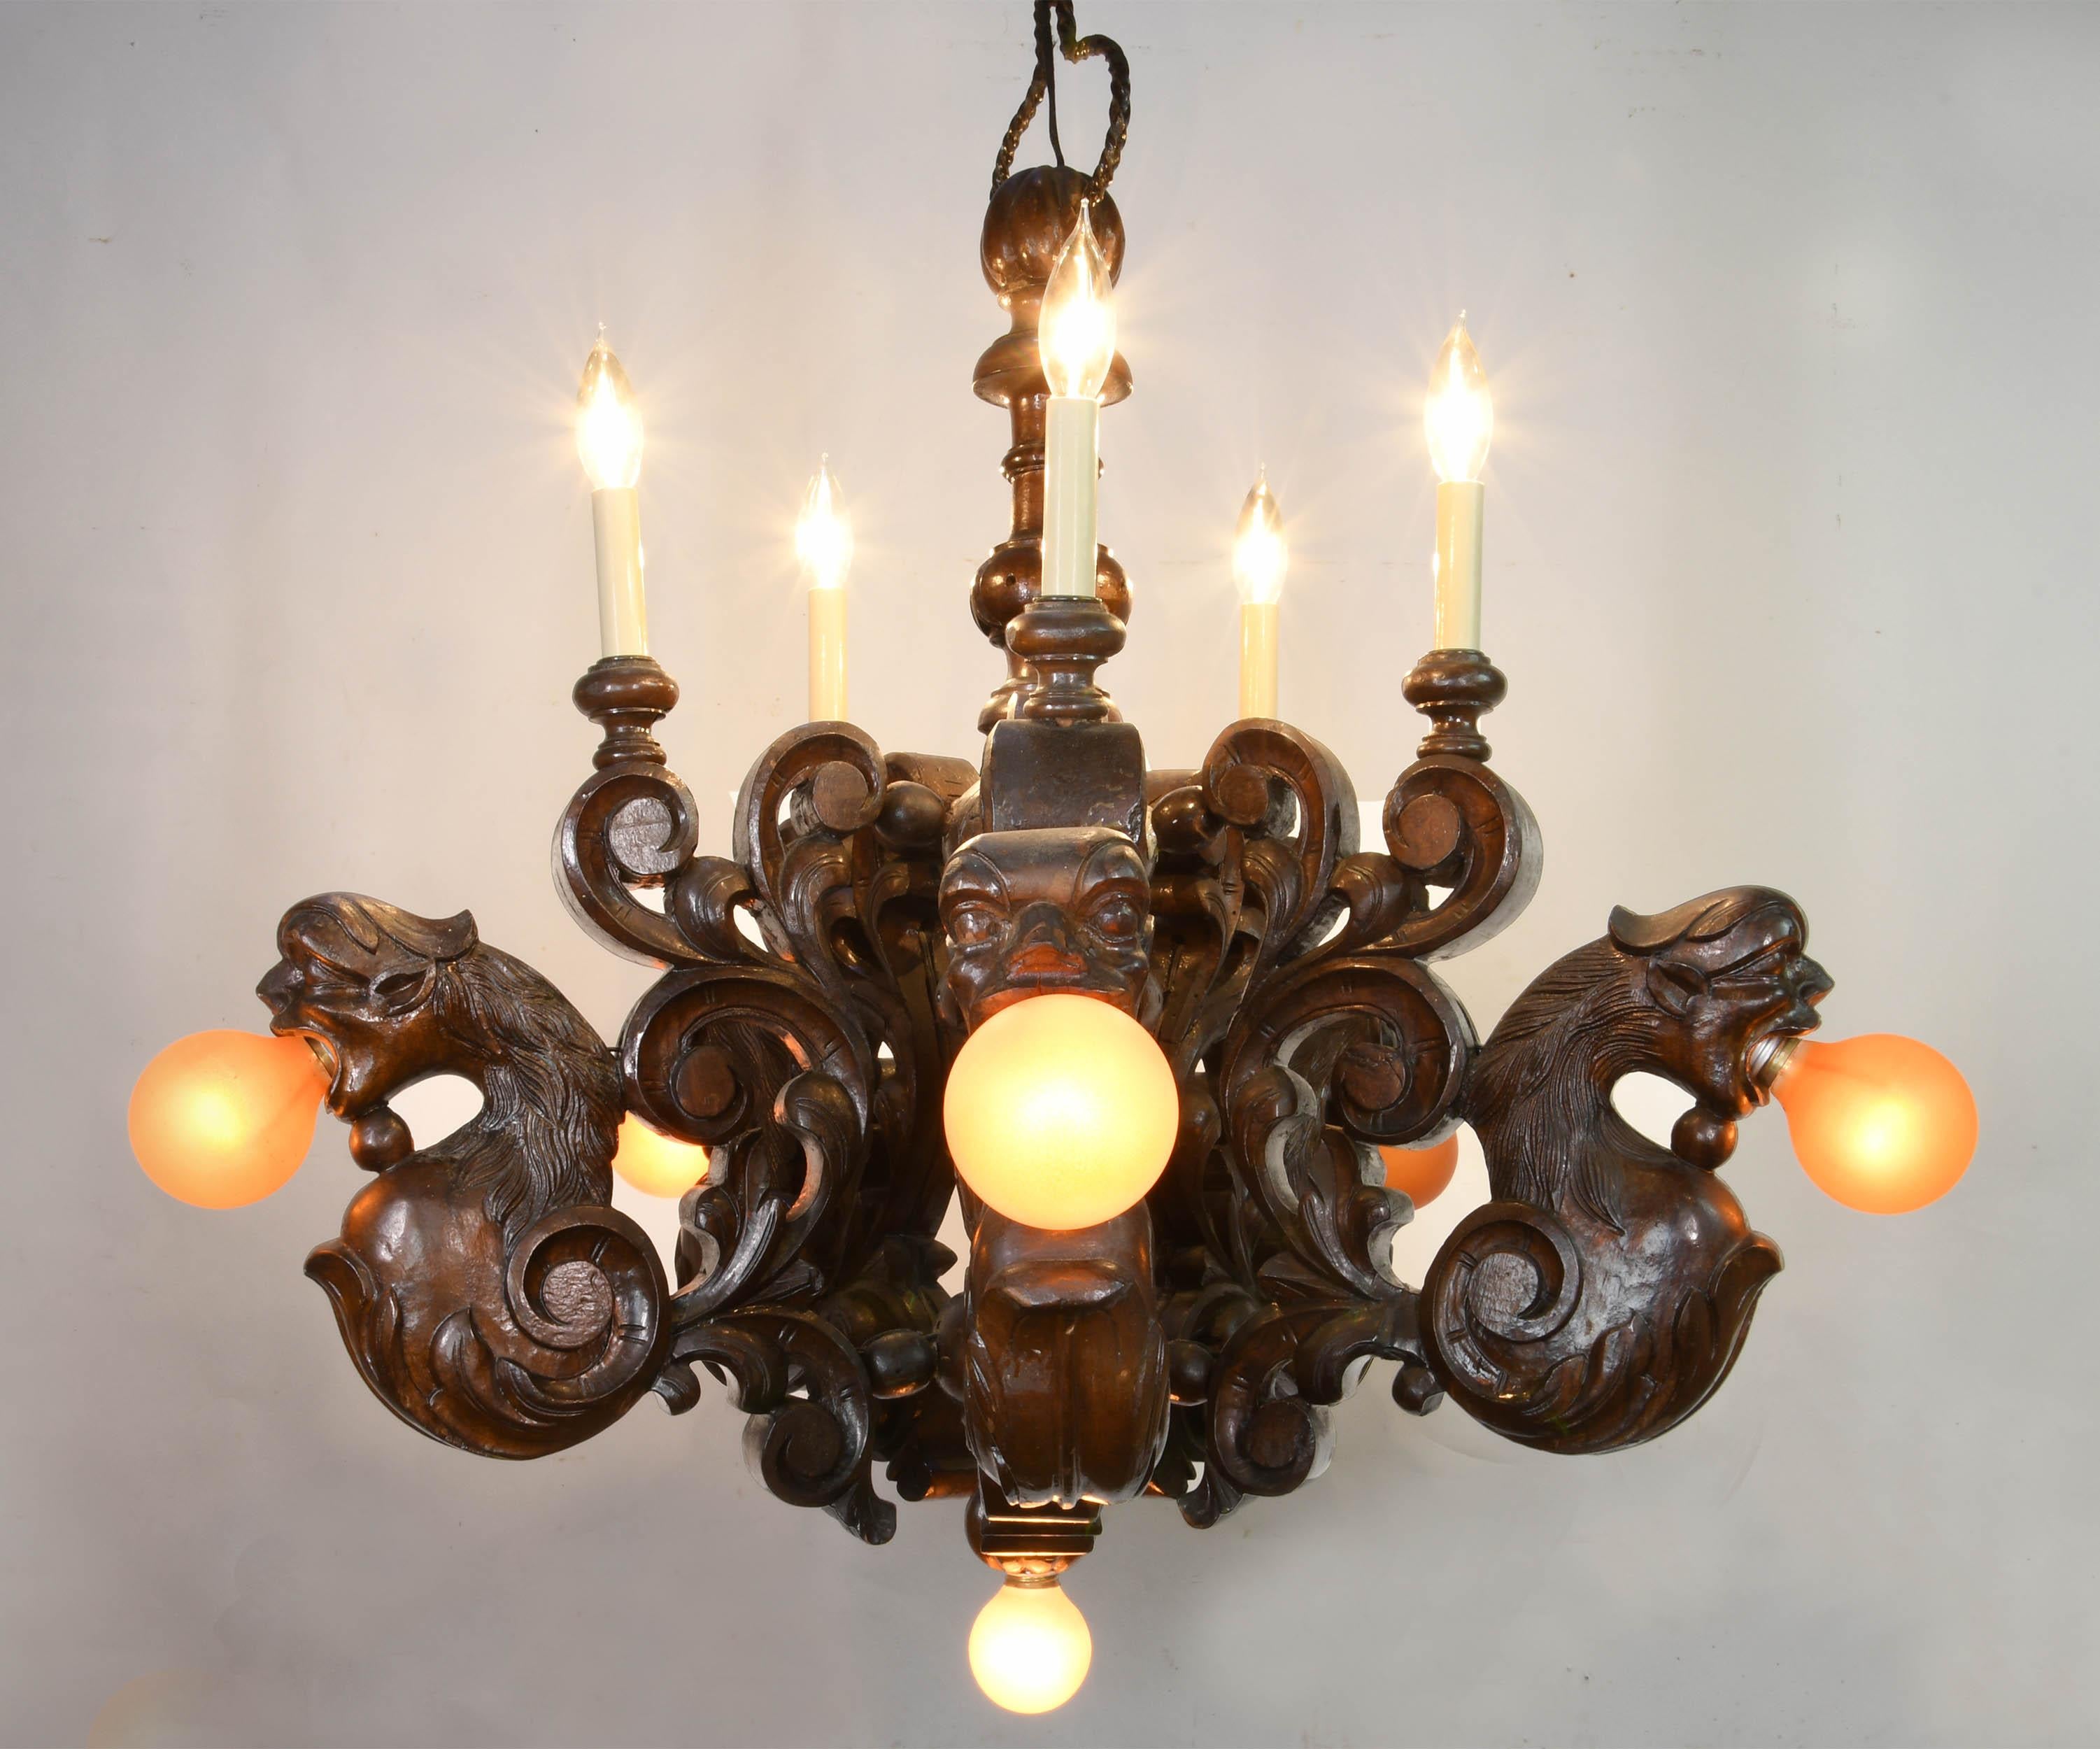 This grand Gothic design of 11 lights and five dragon heads will bring harmony to any large Tudor room. Central orbs create the central body of the fixture with beaded elements holding substantial carved acanthus which meta-morph into bearded